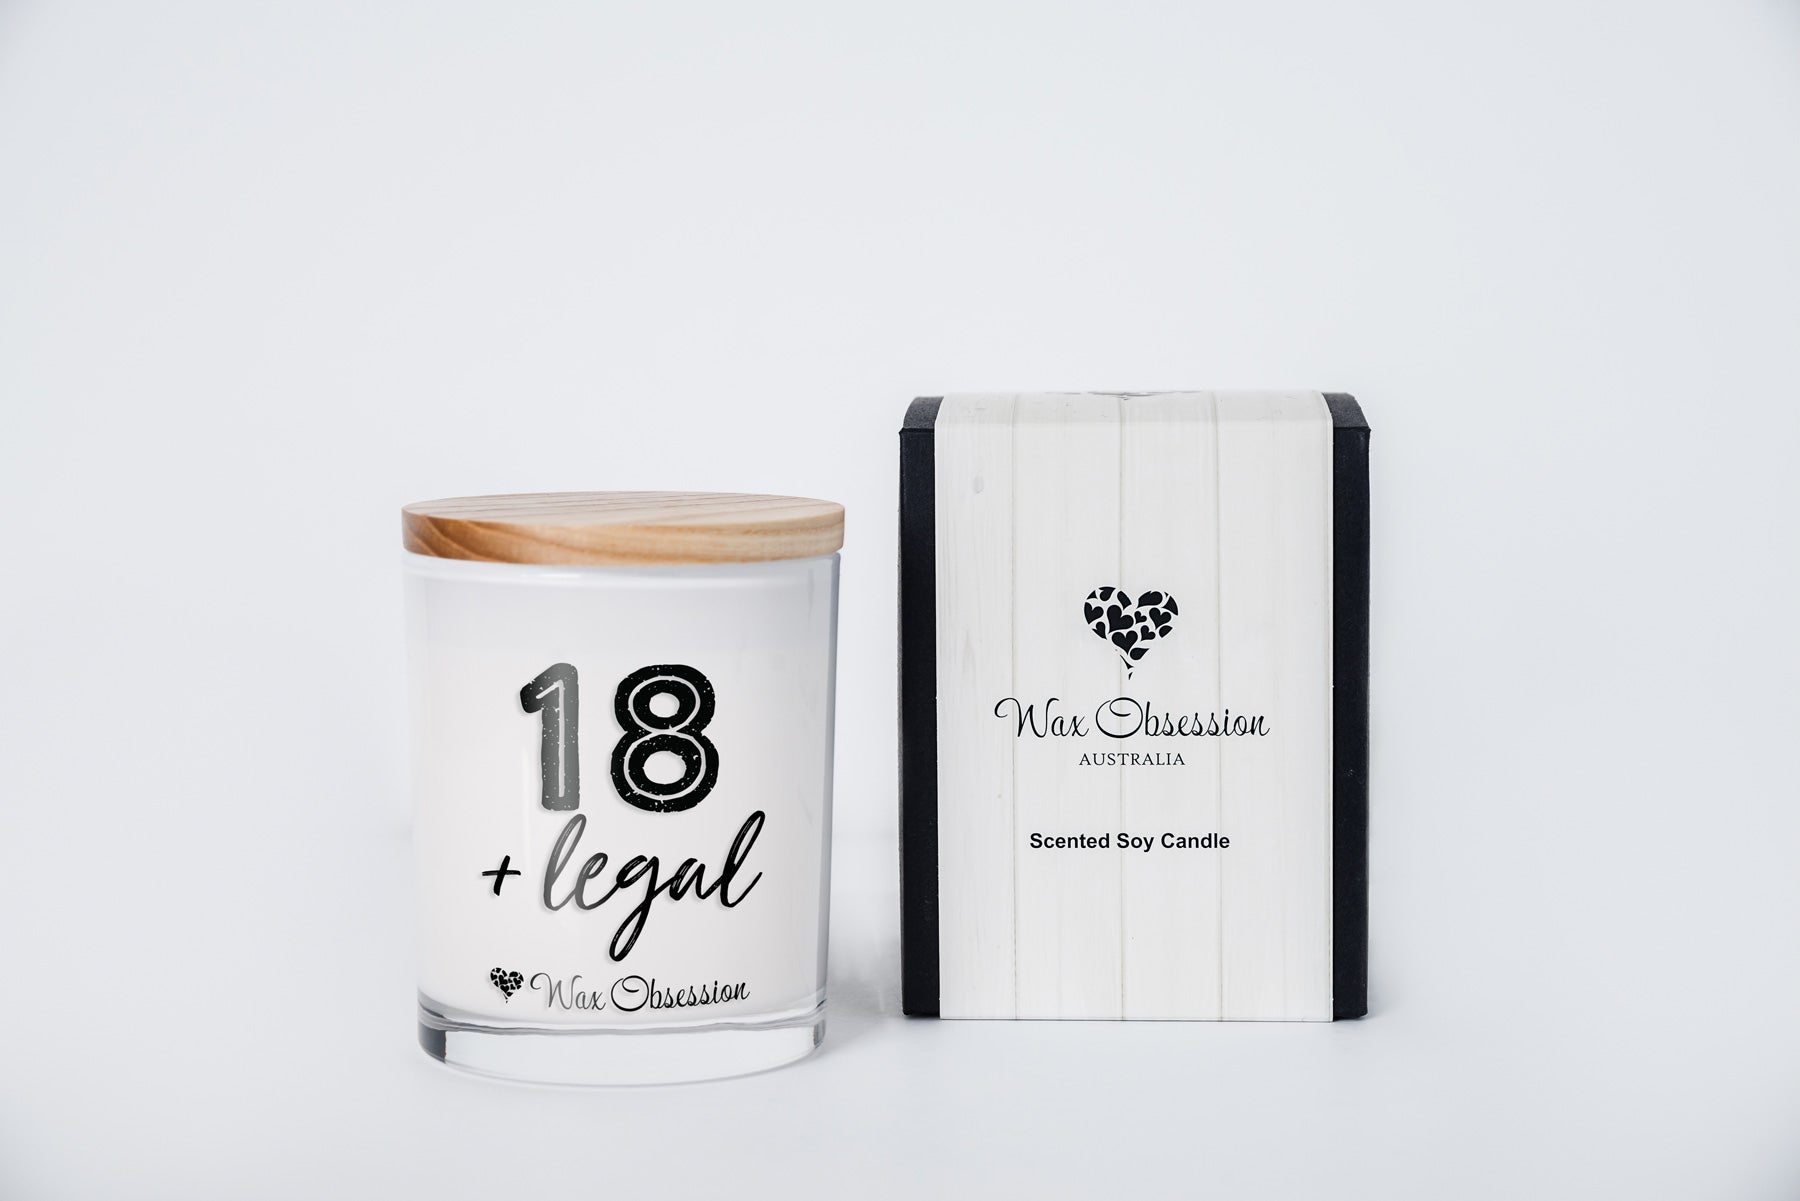 Quote Candle - 18 and Legal